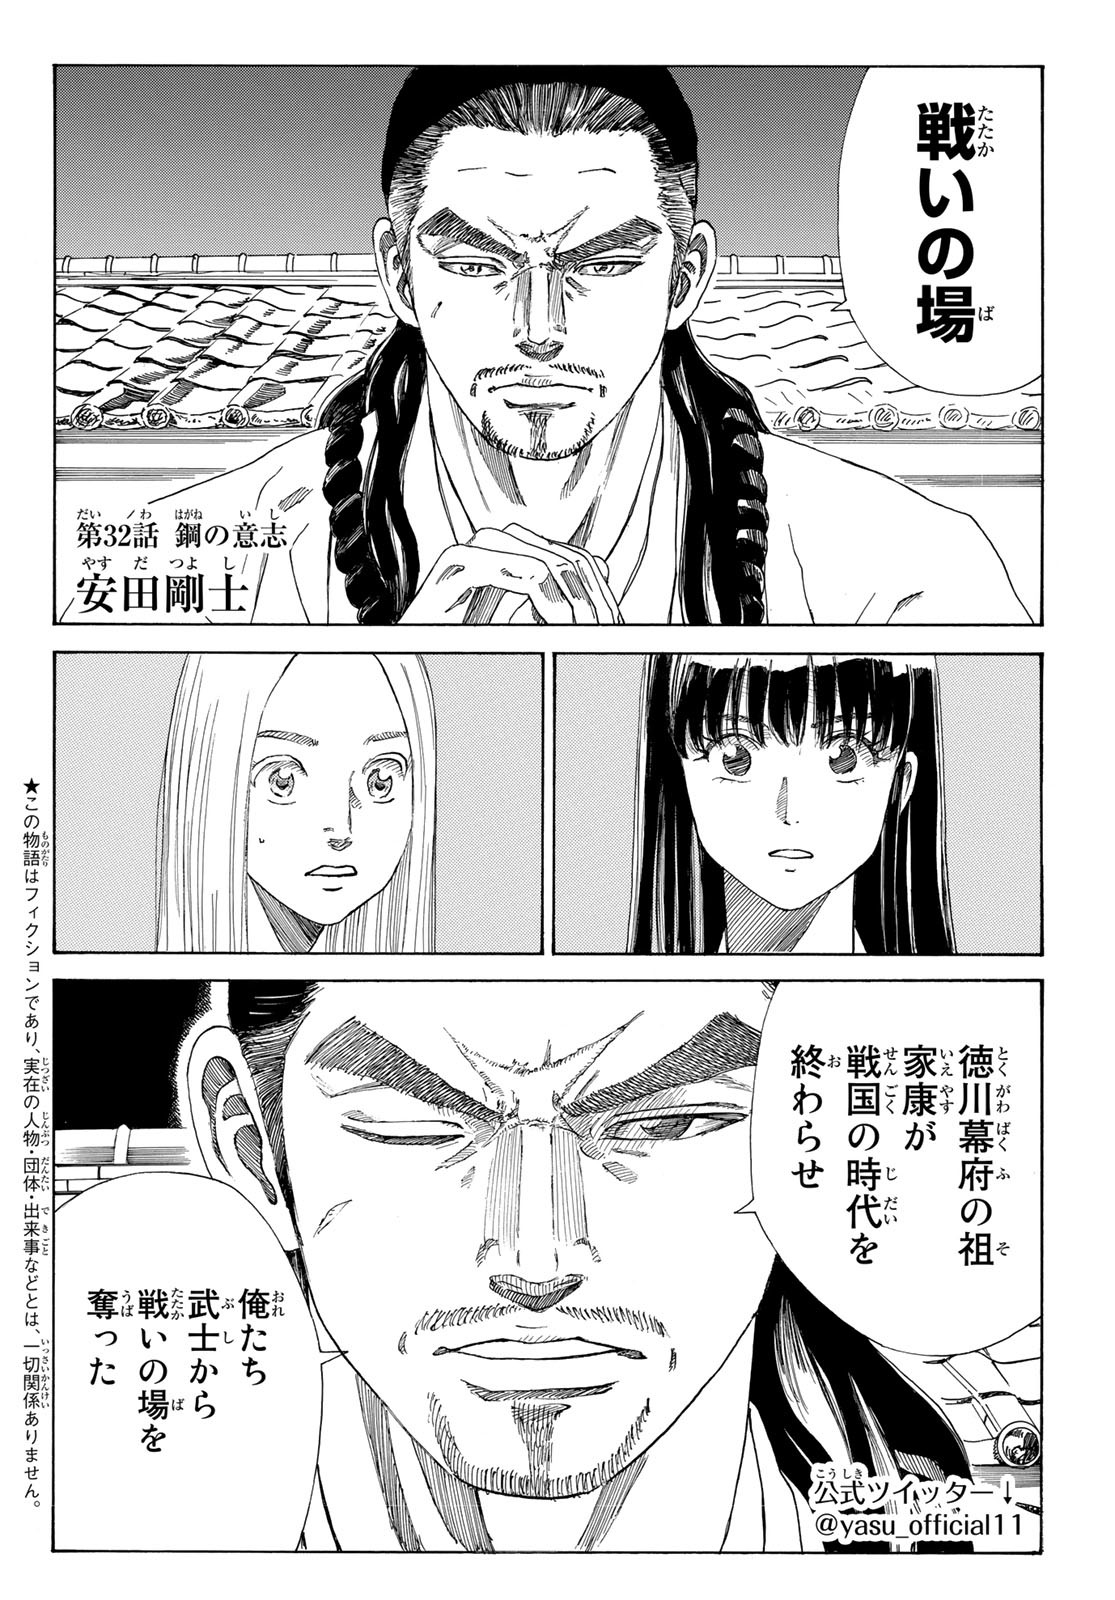 An Mo Miburo 第32話 - Page 2